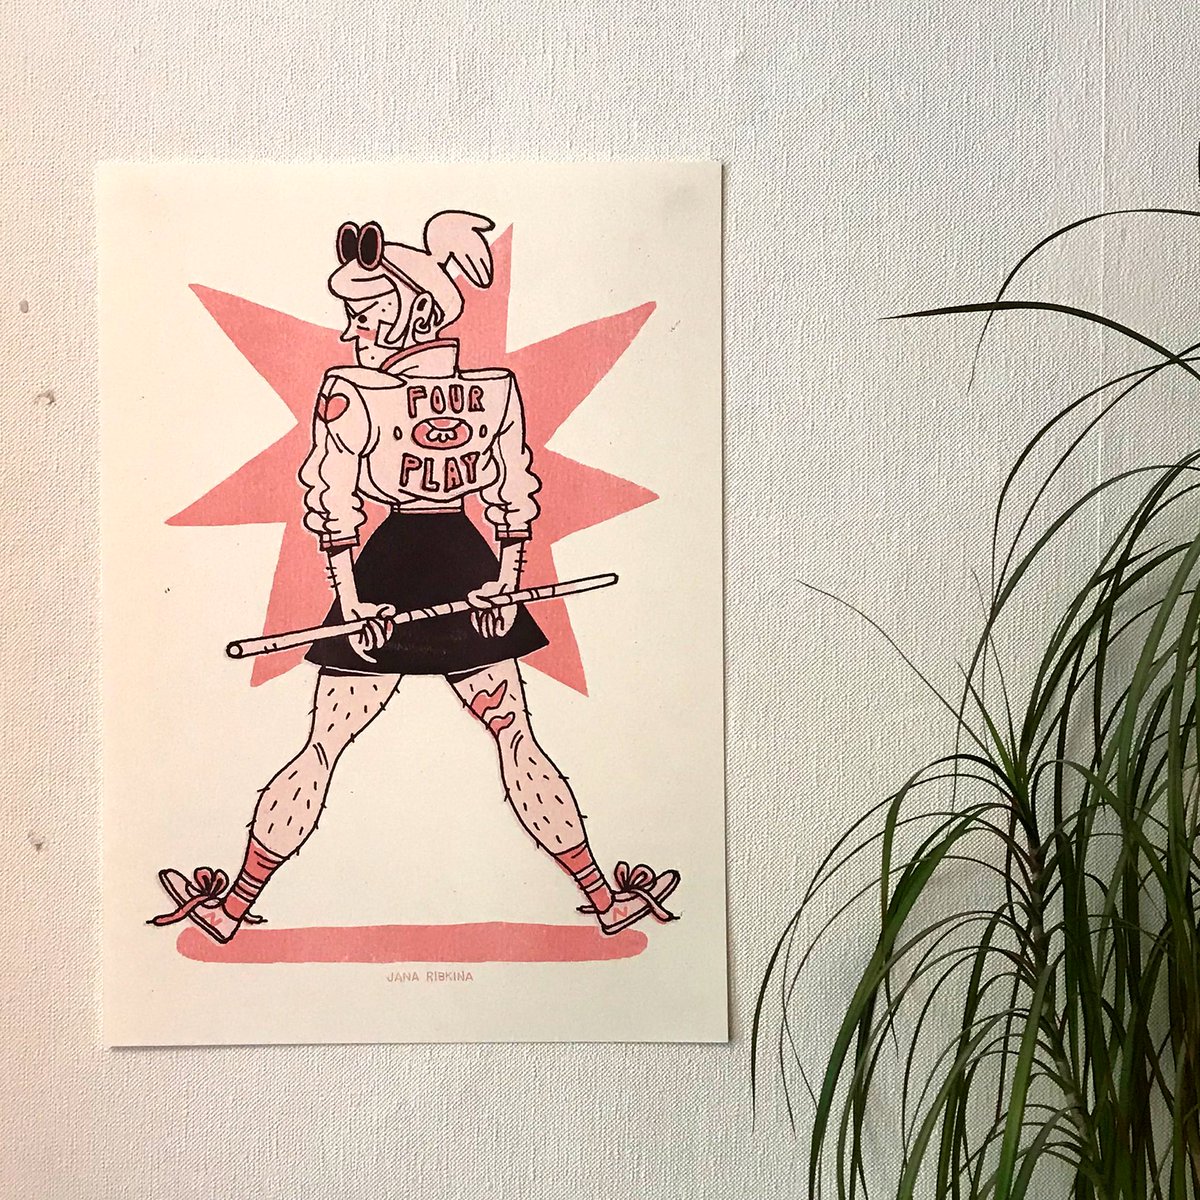 there are still a few leftover A3 riso-prints left! 
15$ including shipping worldwide! ✨
DM me here or at jana.ribkina@gmail.com 